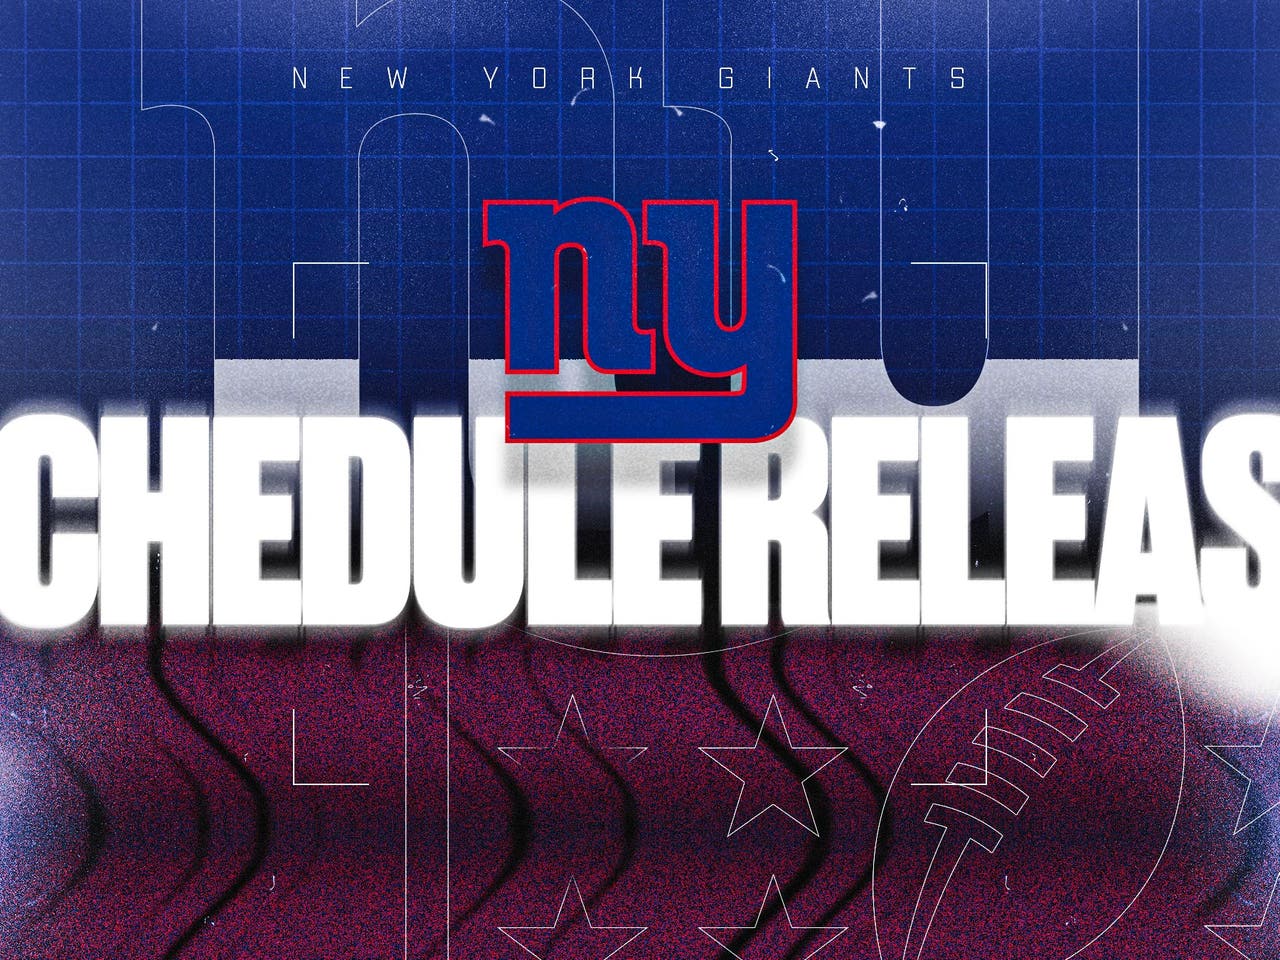 Giants 2023 Schedule: game-by-game analysis and predictions